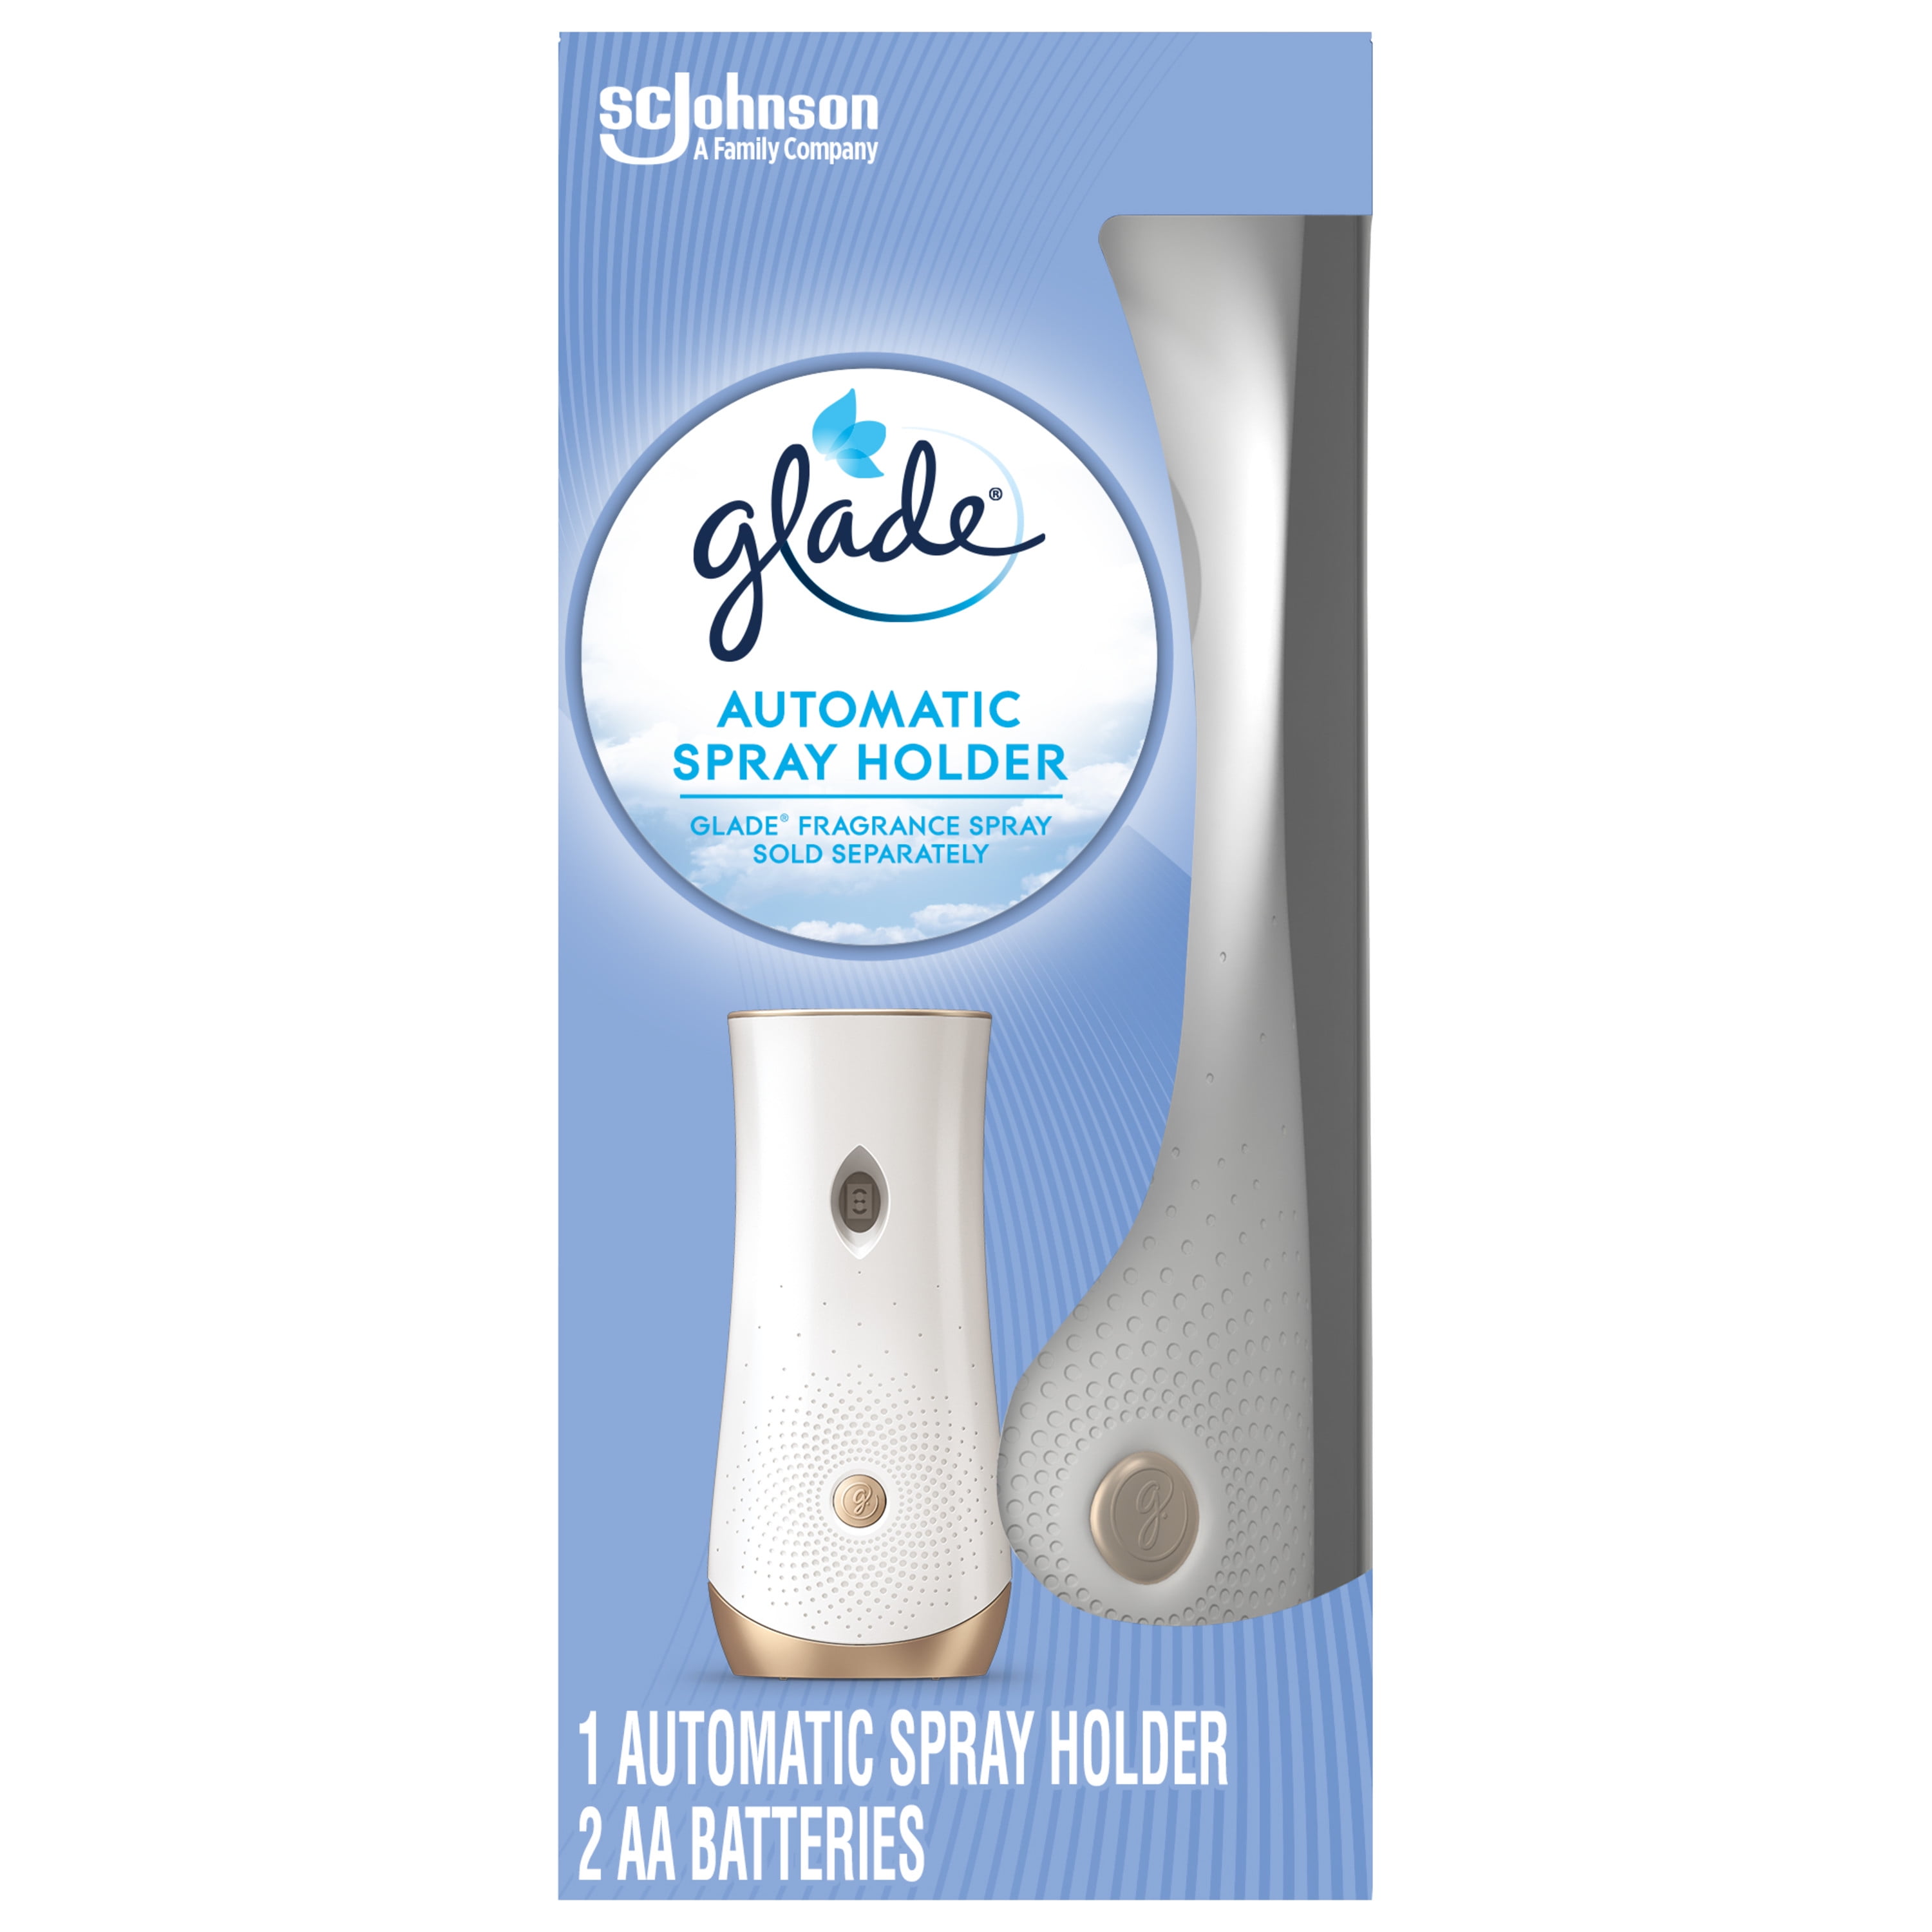 Glade Automatic Spray Holder 1 CT, Battery-Operated Holder for Automatic  Spray Refill, 10.2 oz 